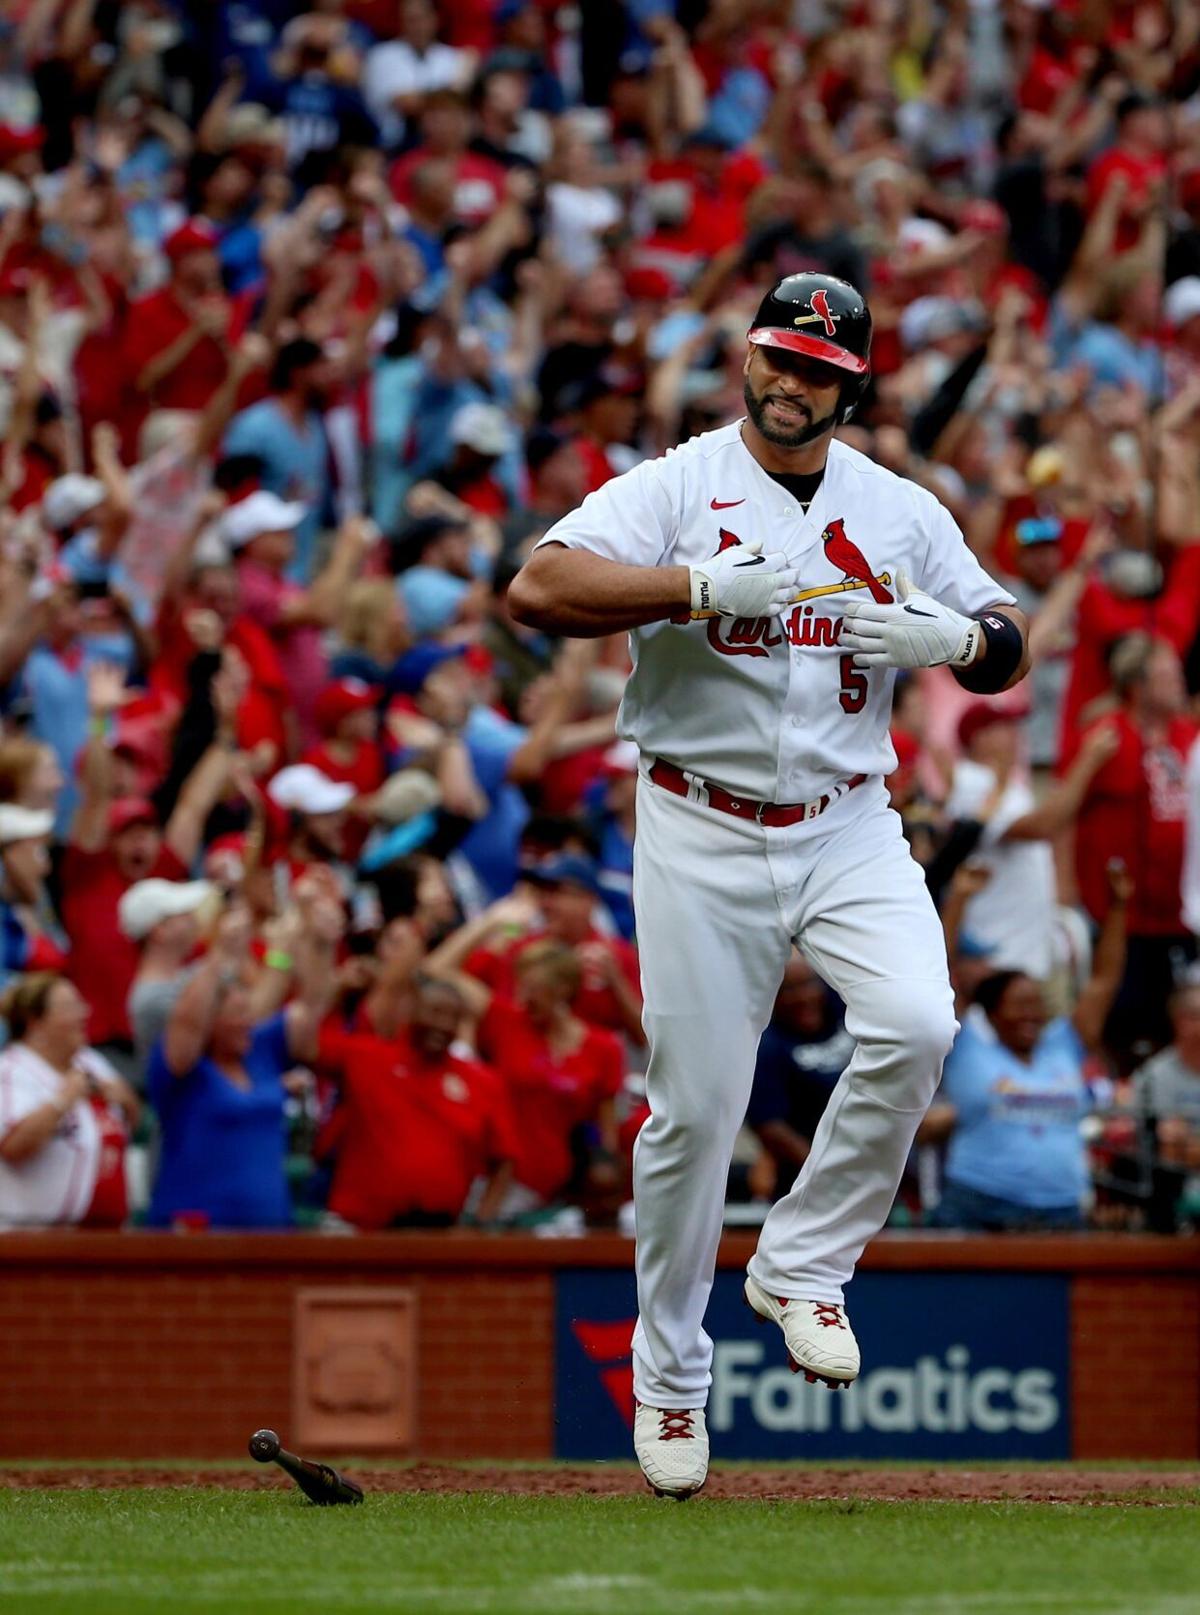 2022 in Review: Albert Pujols Is Great but the Cards Choke in the Playoffs, St. Louis Metro News, St. Louis